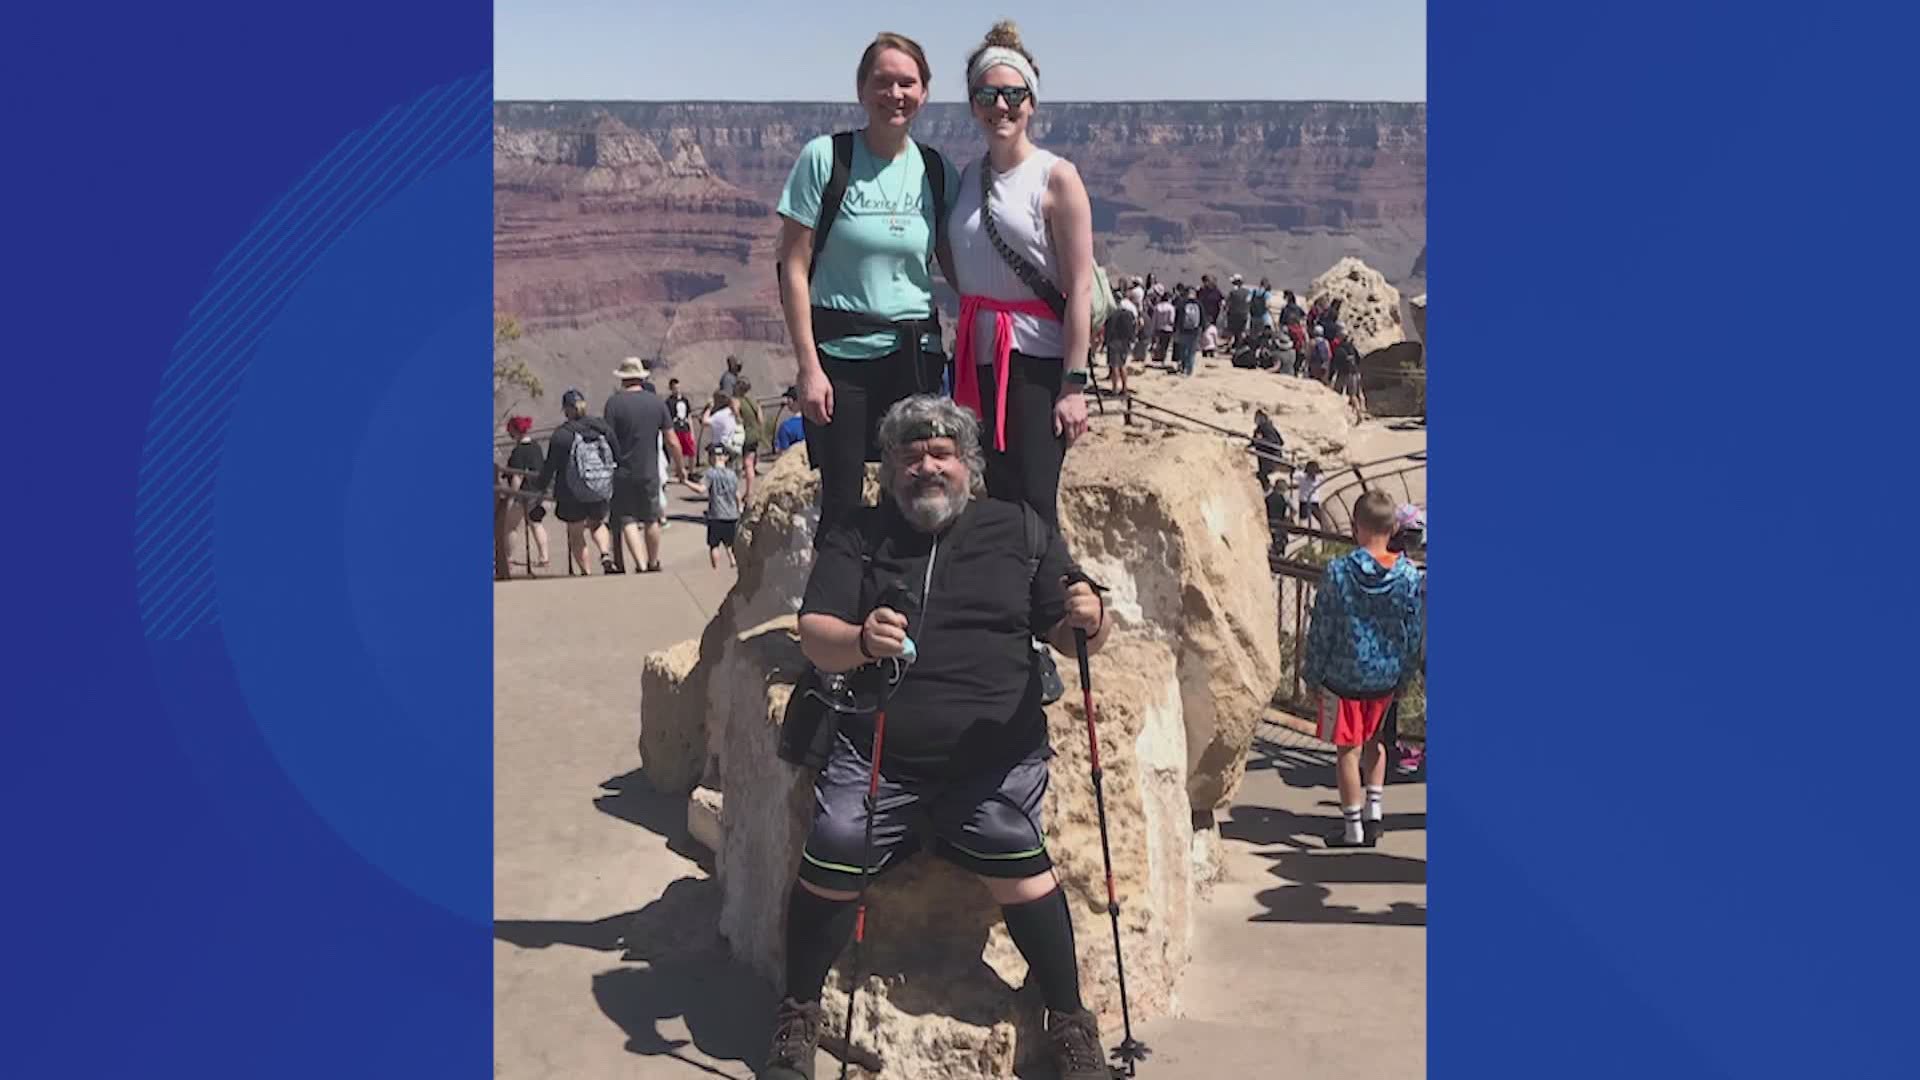 He went from spending more than a month in the ICU, to this week, he’s hiking the Grand Canyon.